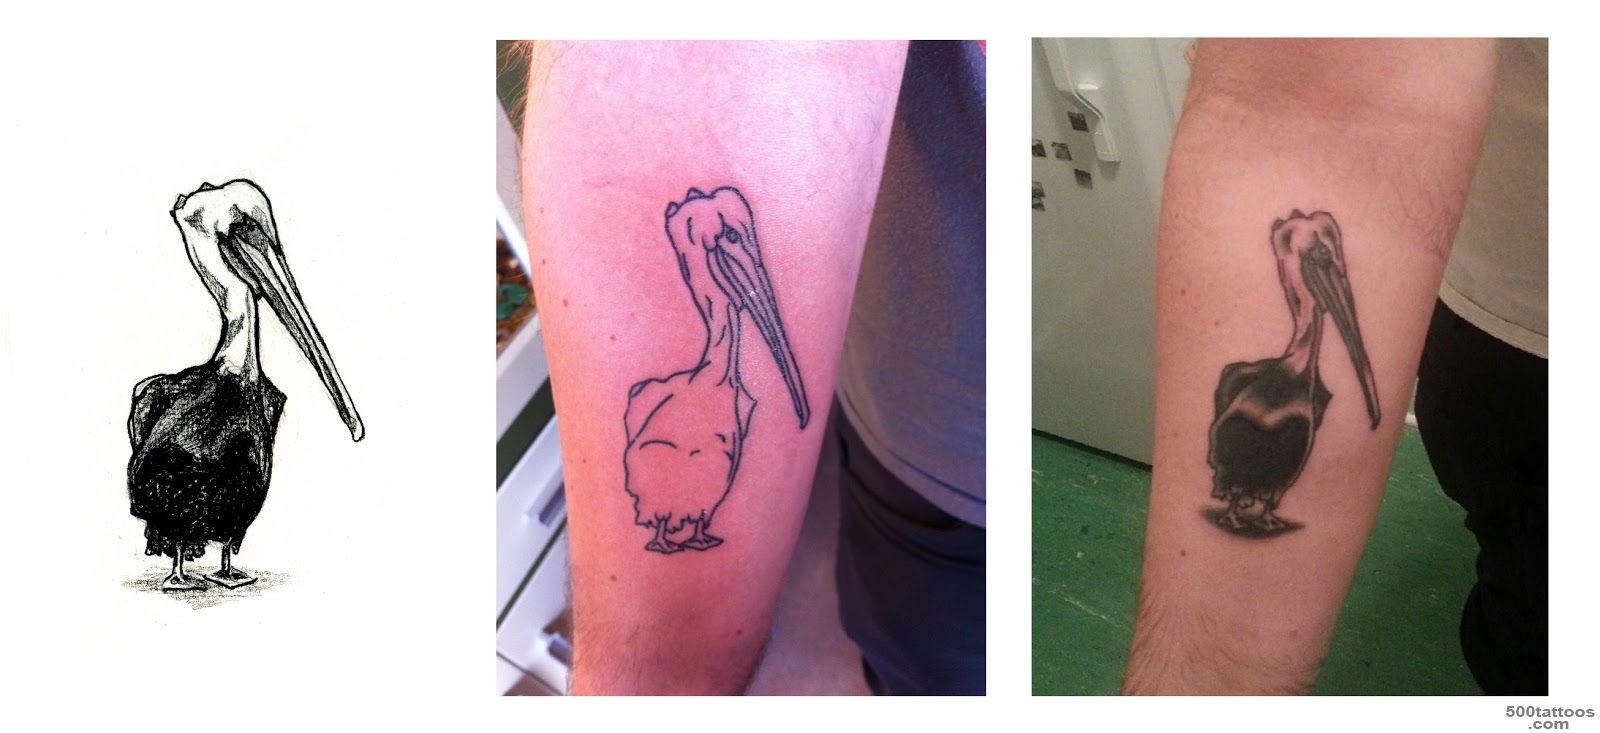 Pin Cooper Got His First Tattoo Of The Pelican I Drew For Him In ..._50